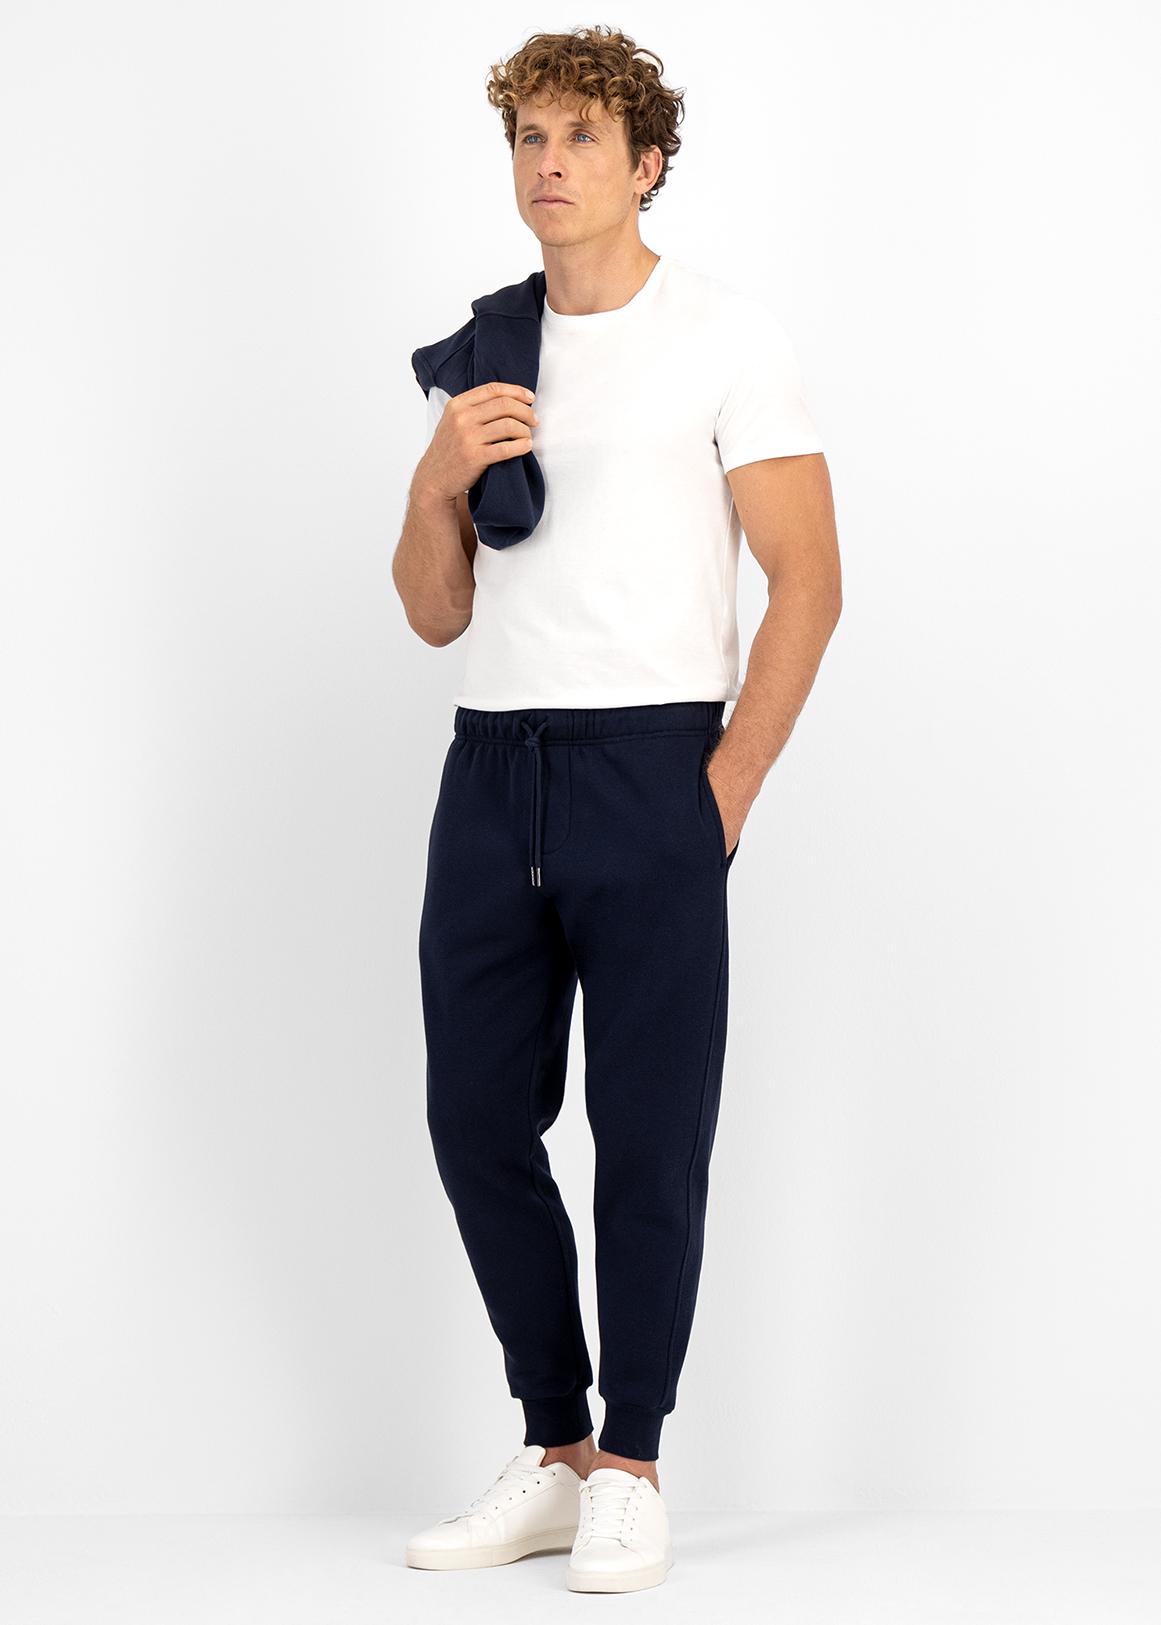 South Beach slim fit polyester sweatpants in navy